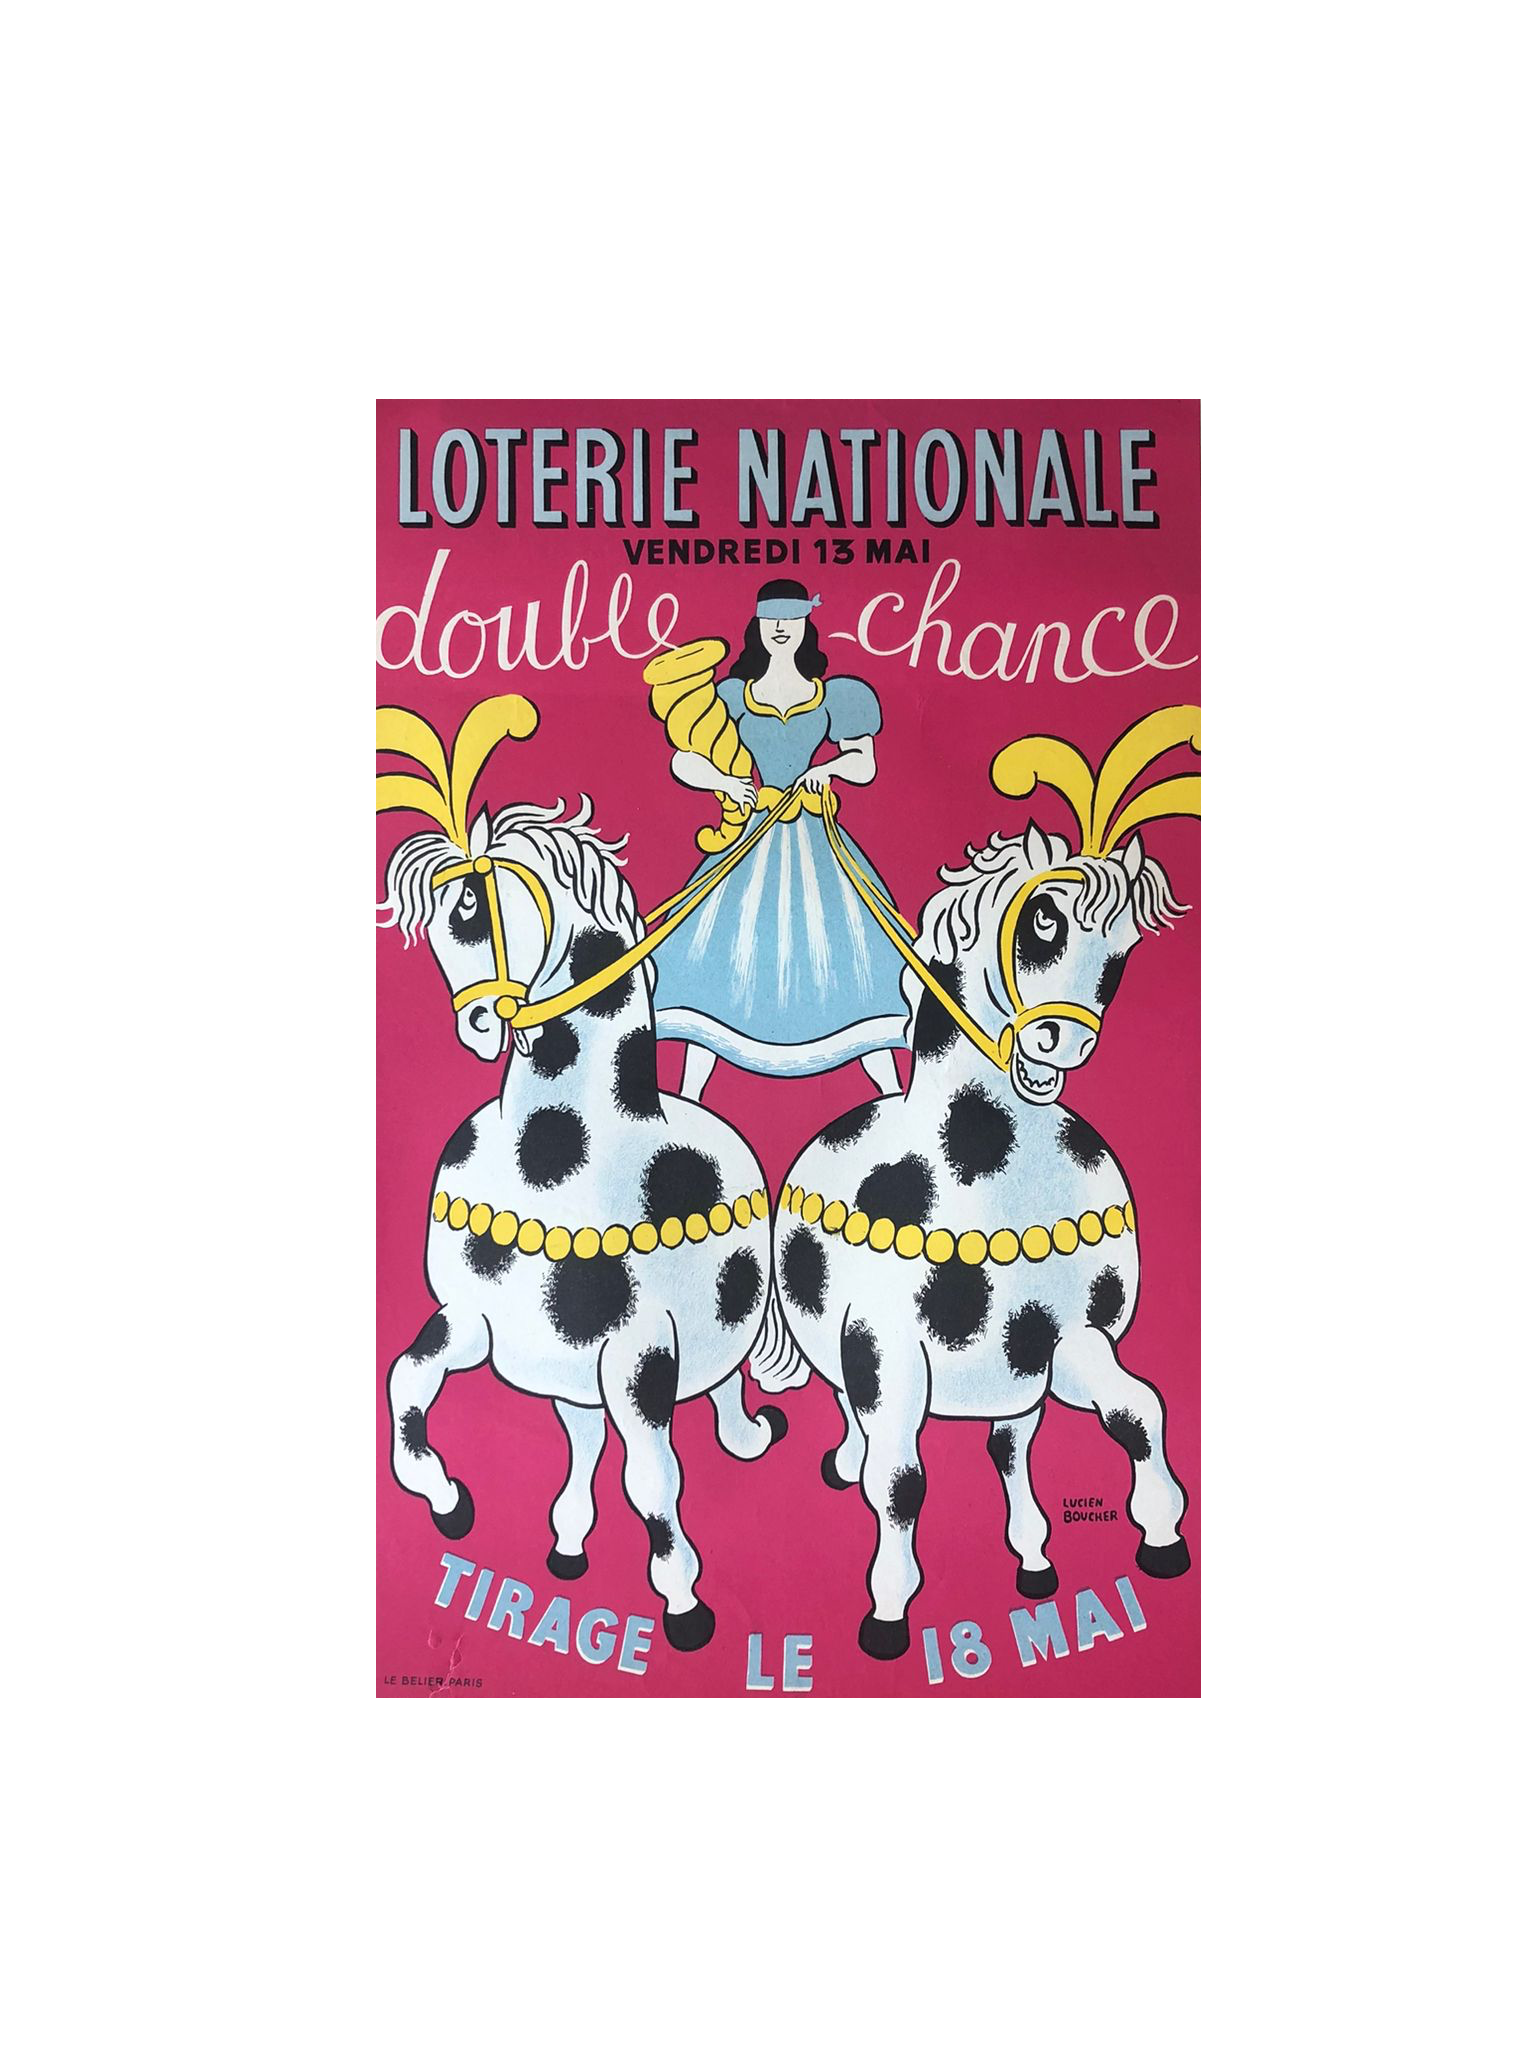 Loterie Nationale Advertisement